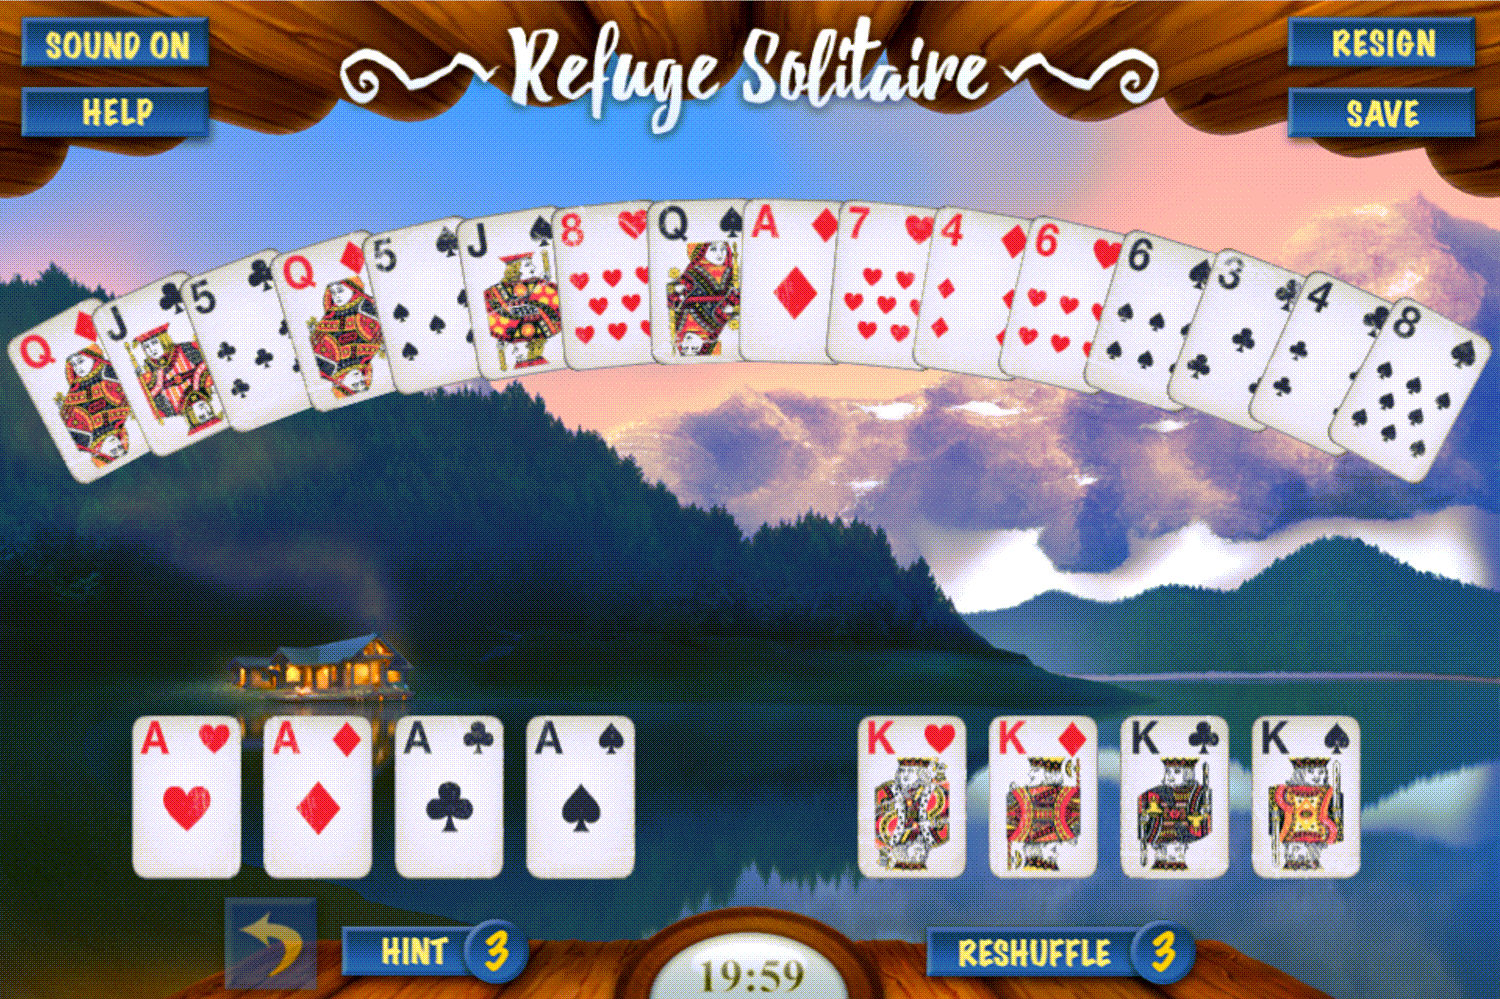 How to Play Solitaire : Rules of Solitaire : Solitaire FREE Online